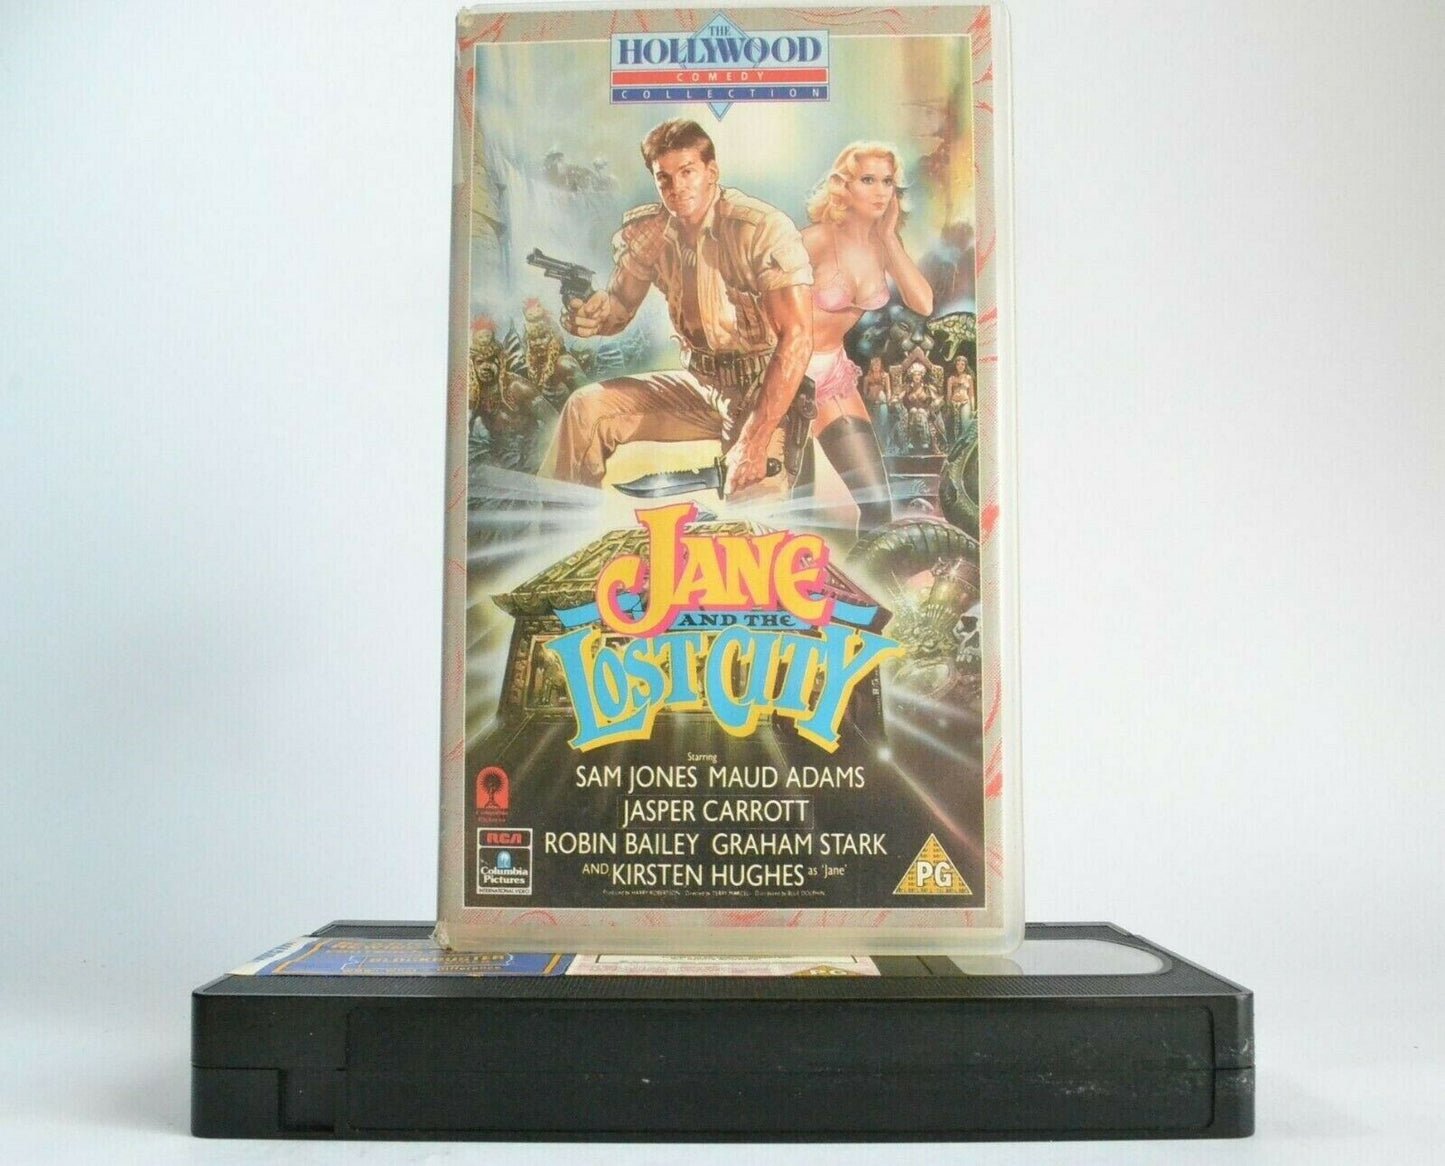 Jane And The Lost City (1987): African Adventure - World War 2 - [Rental] - VHS-